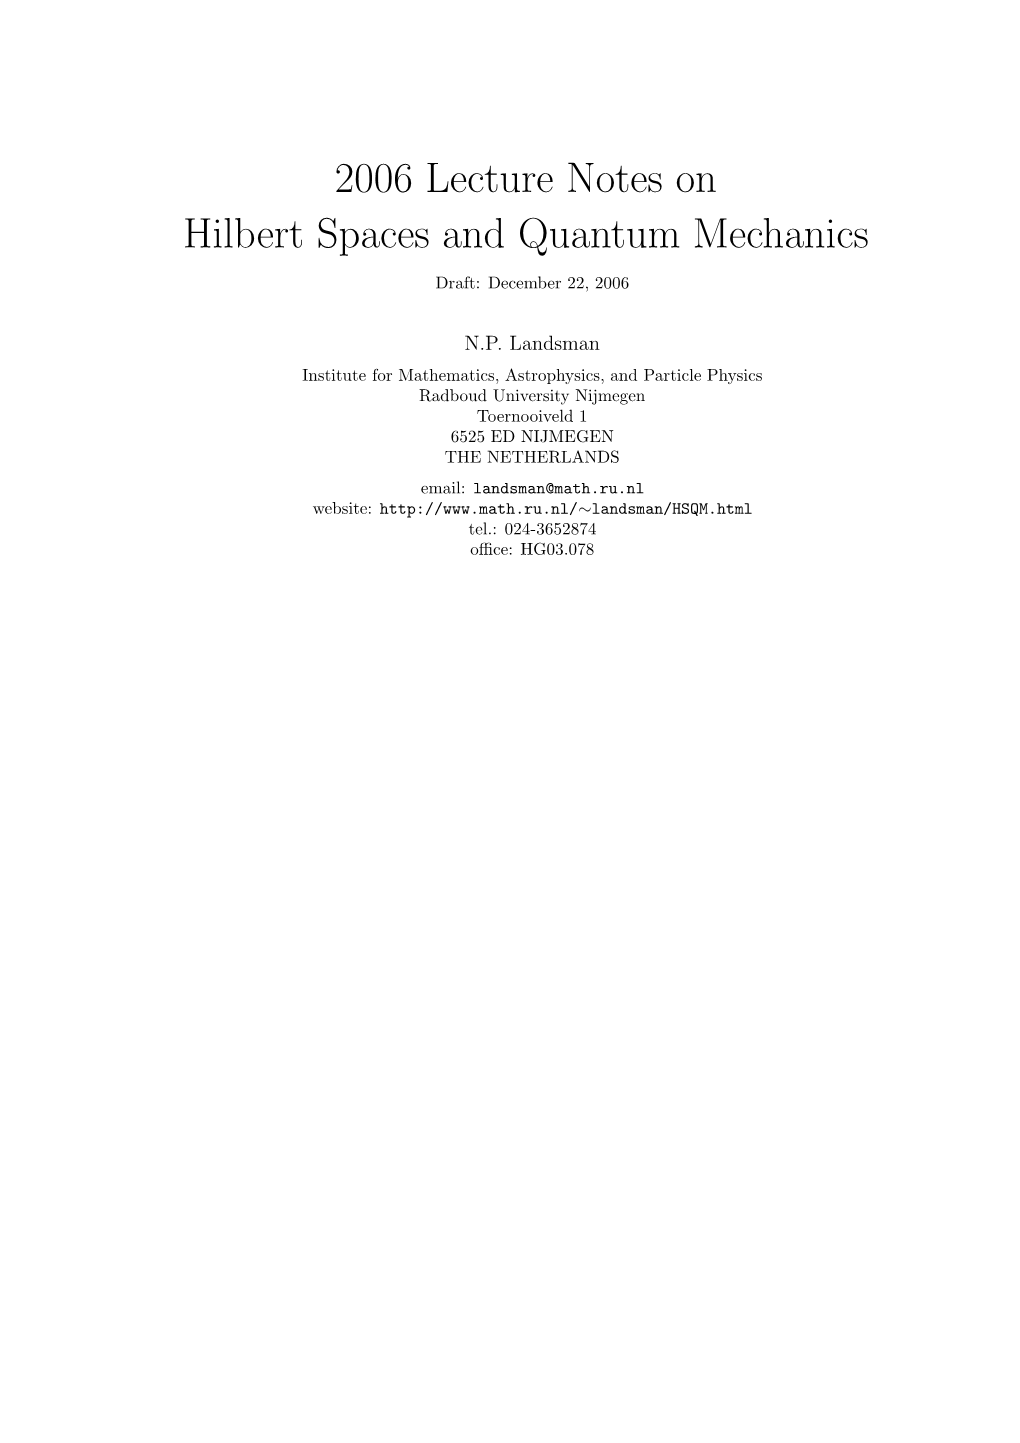 2006 Lecture Notes on Hilbert Spaces and Quantum Mechanics